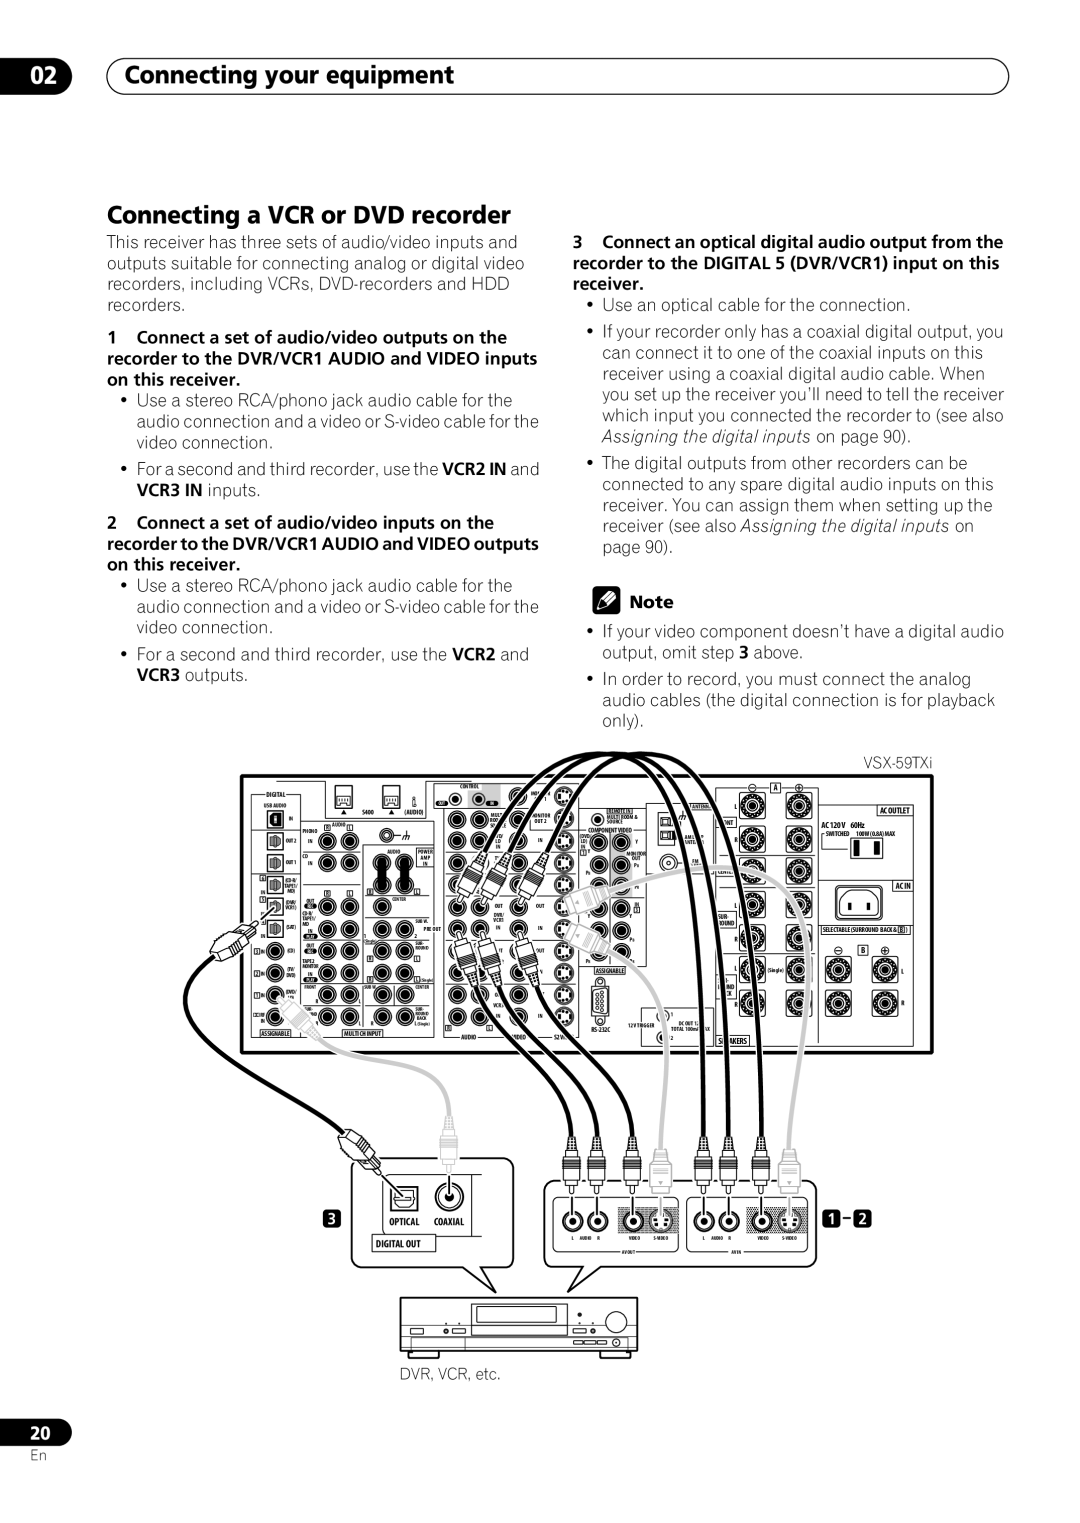 Pioneer VSX-59TXi operating instructions Connecting a VCR or DVD recorder, 02Connecting your equipment 